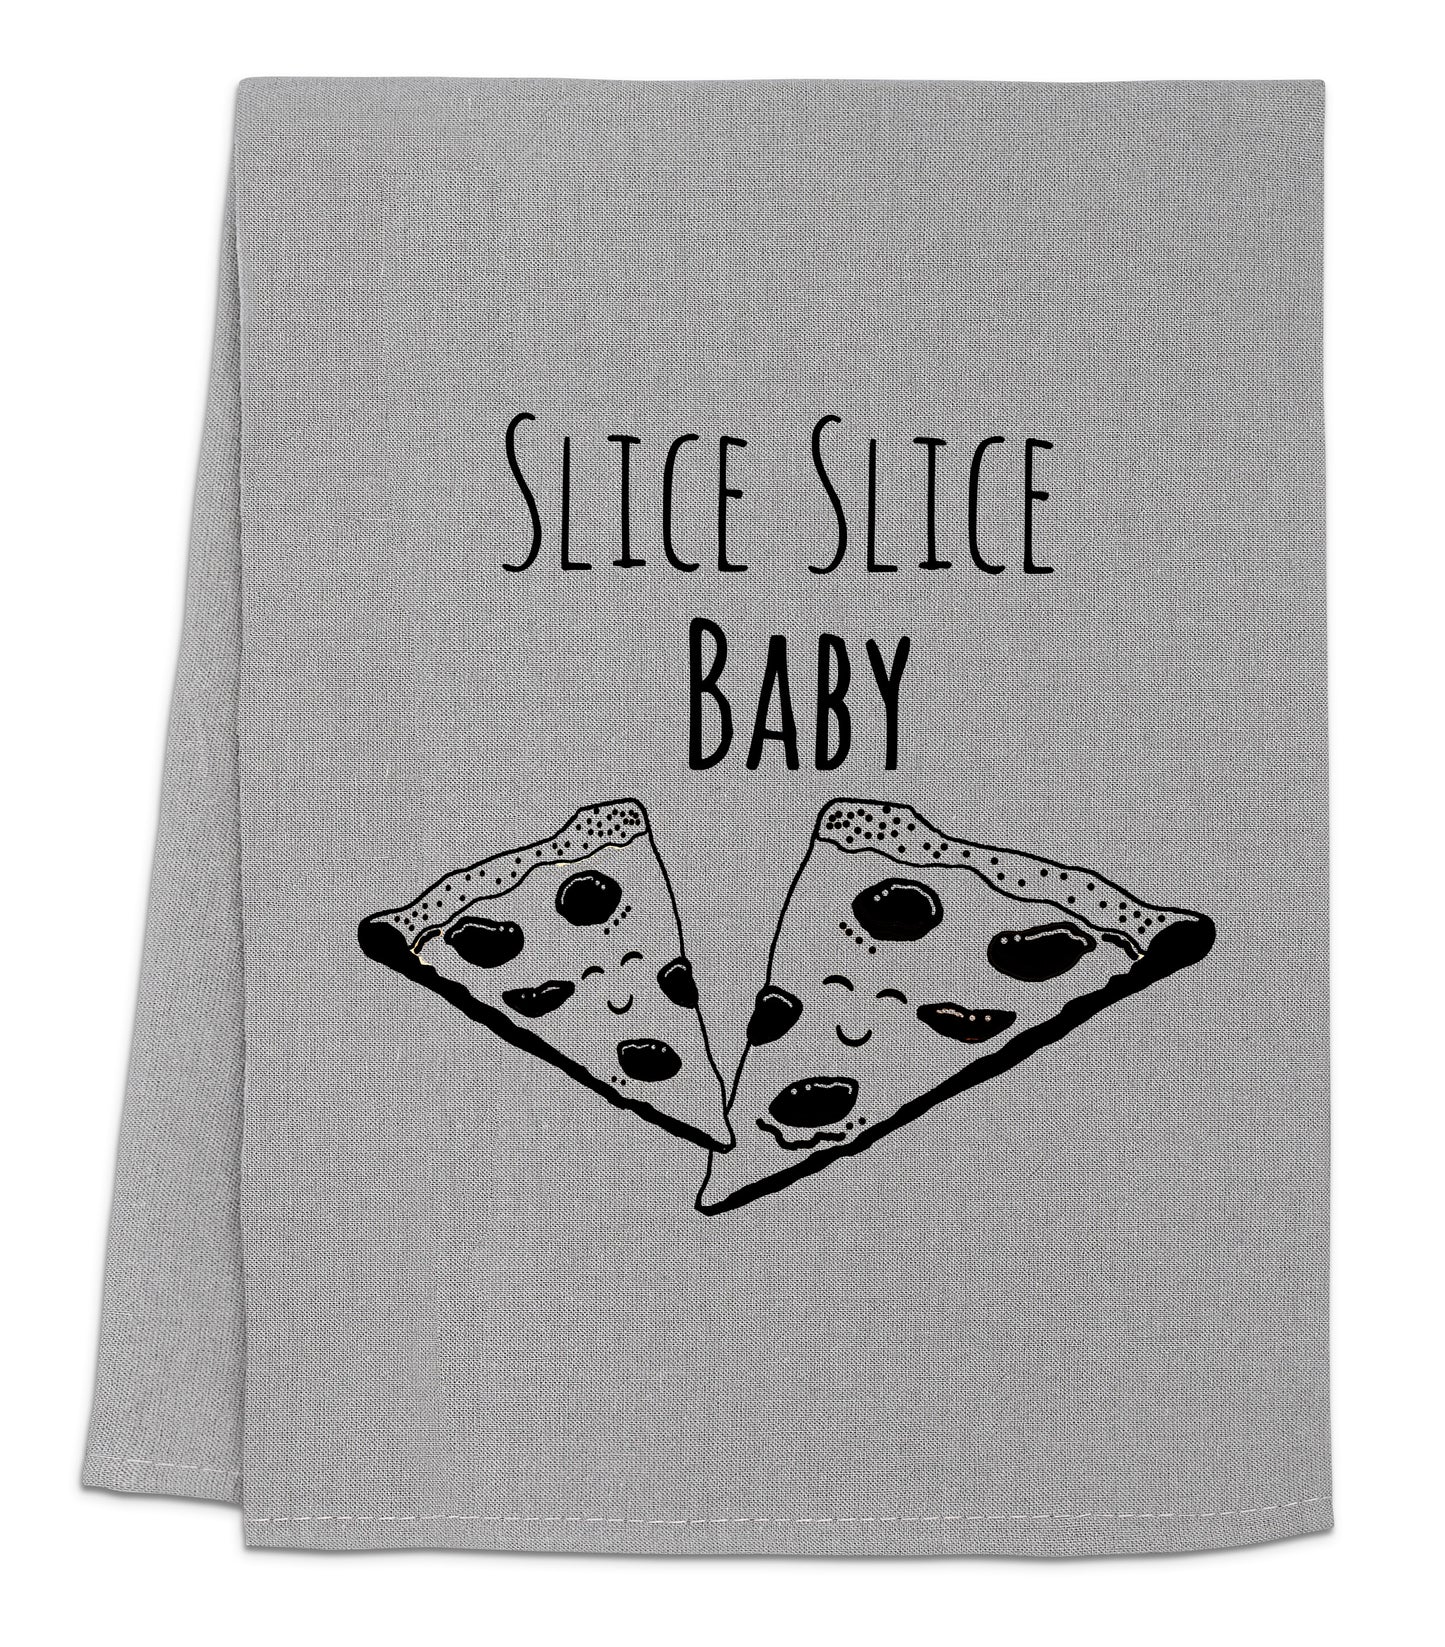 a towel with two slices of pizza printed on it